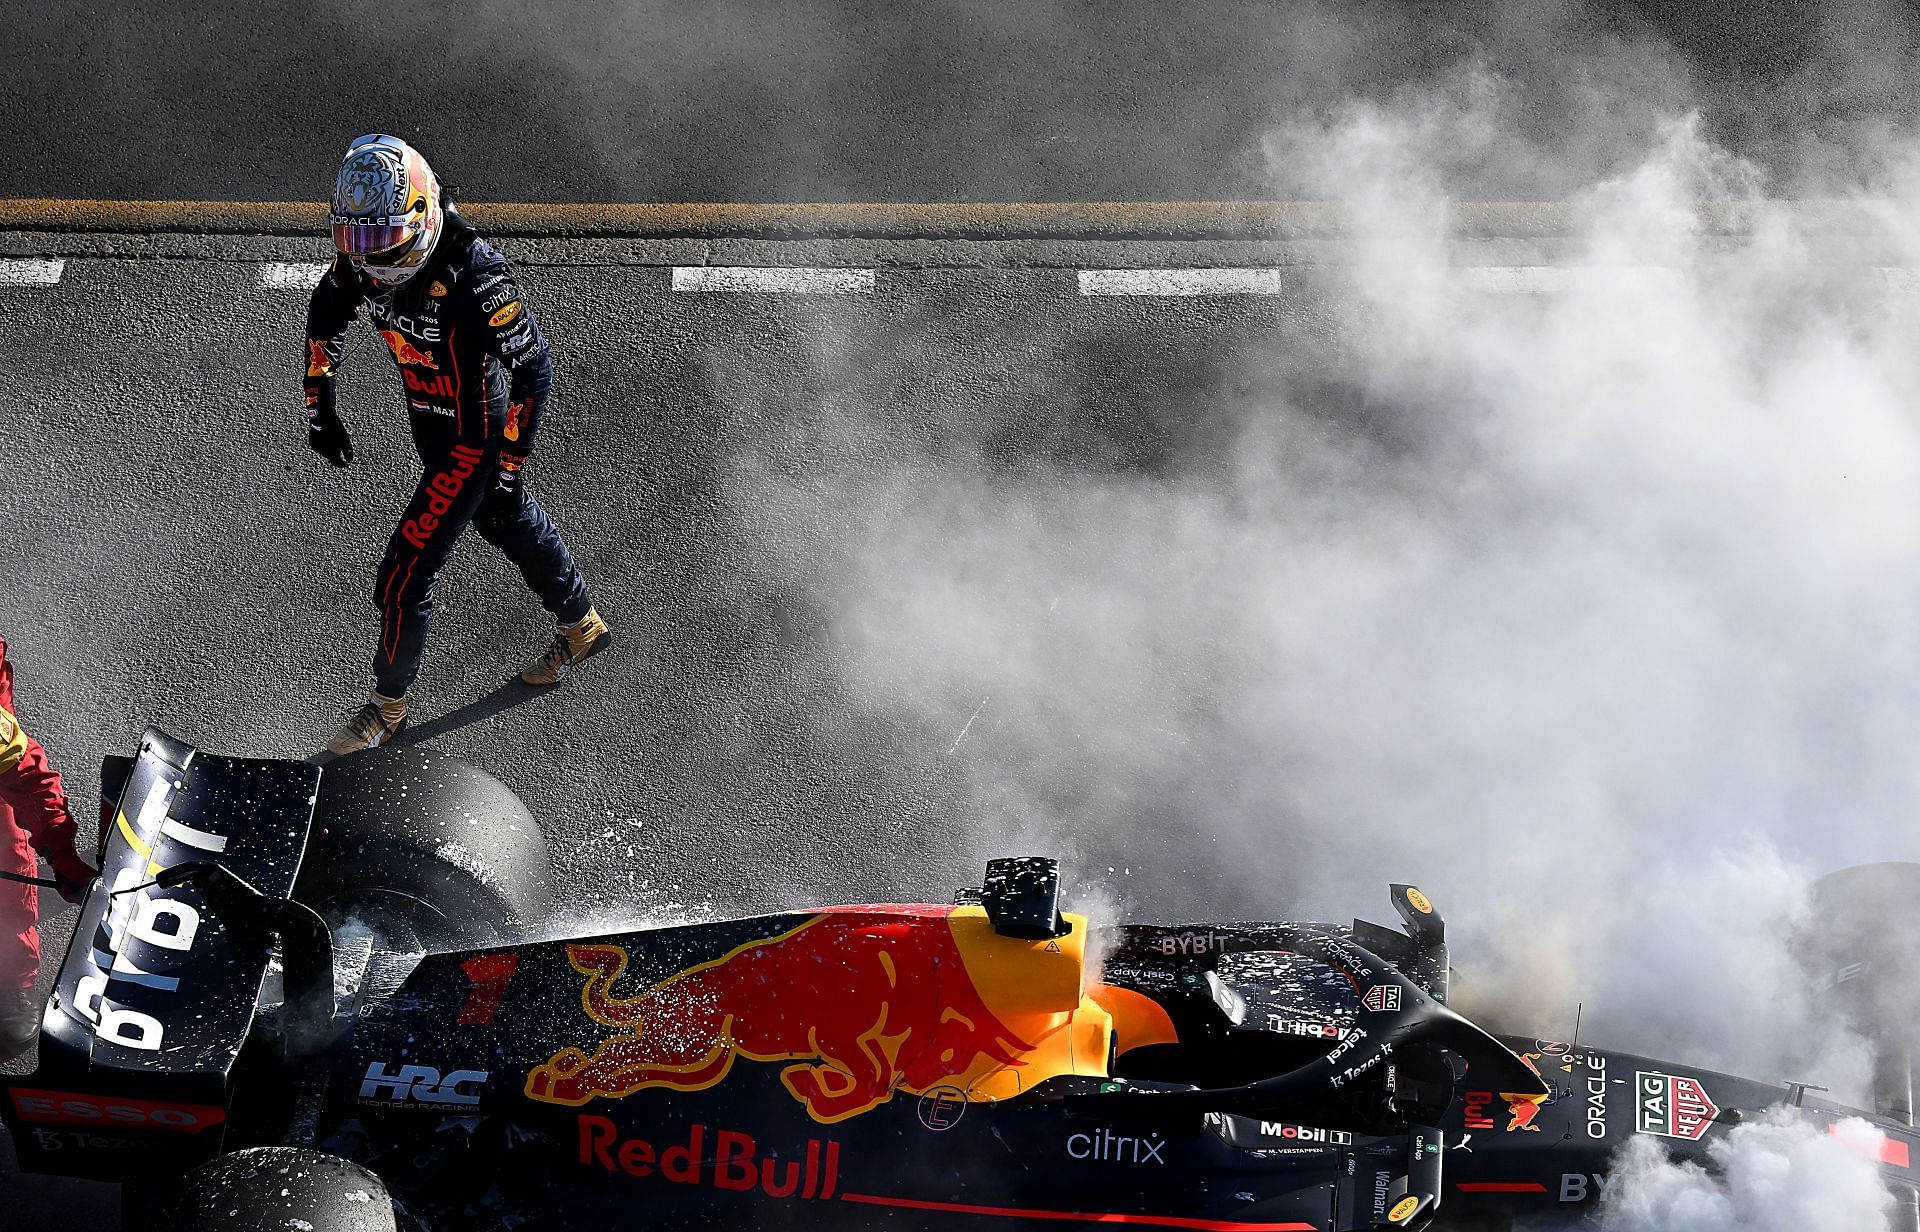 Red Bull and Max Verstappen are desperate for a good result